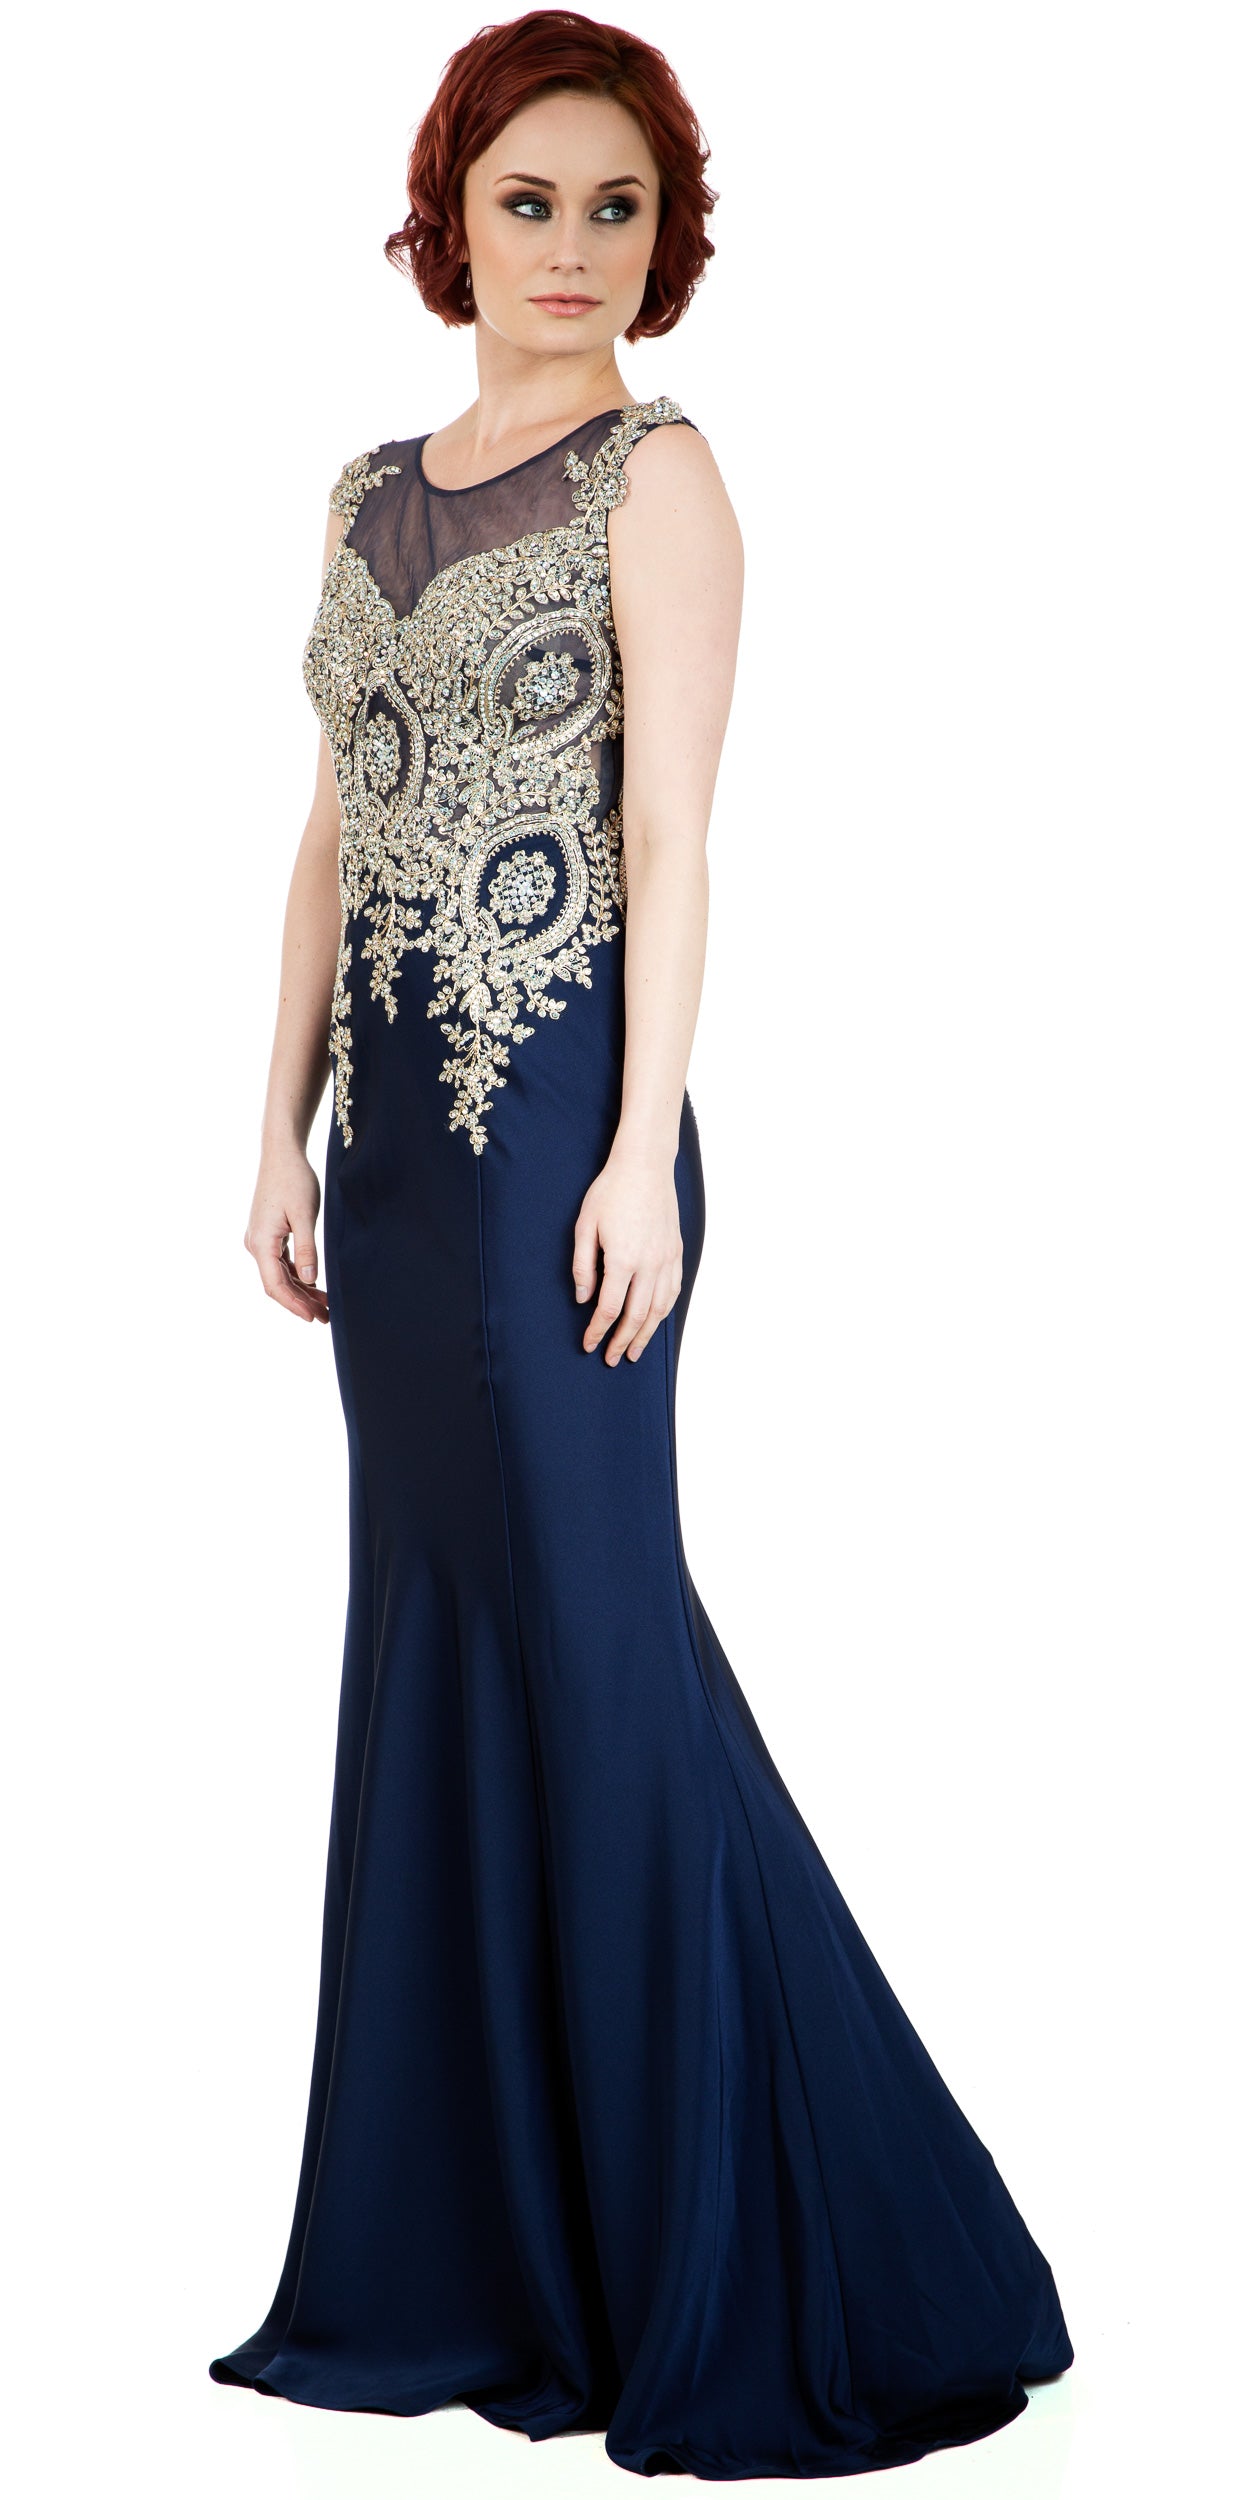 Main image of Boat Neck Fully Embroidered Bodice Long Formal Prom Dress